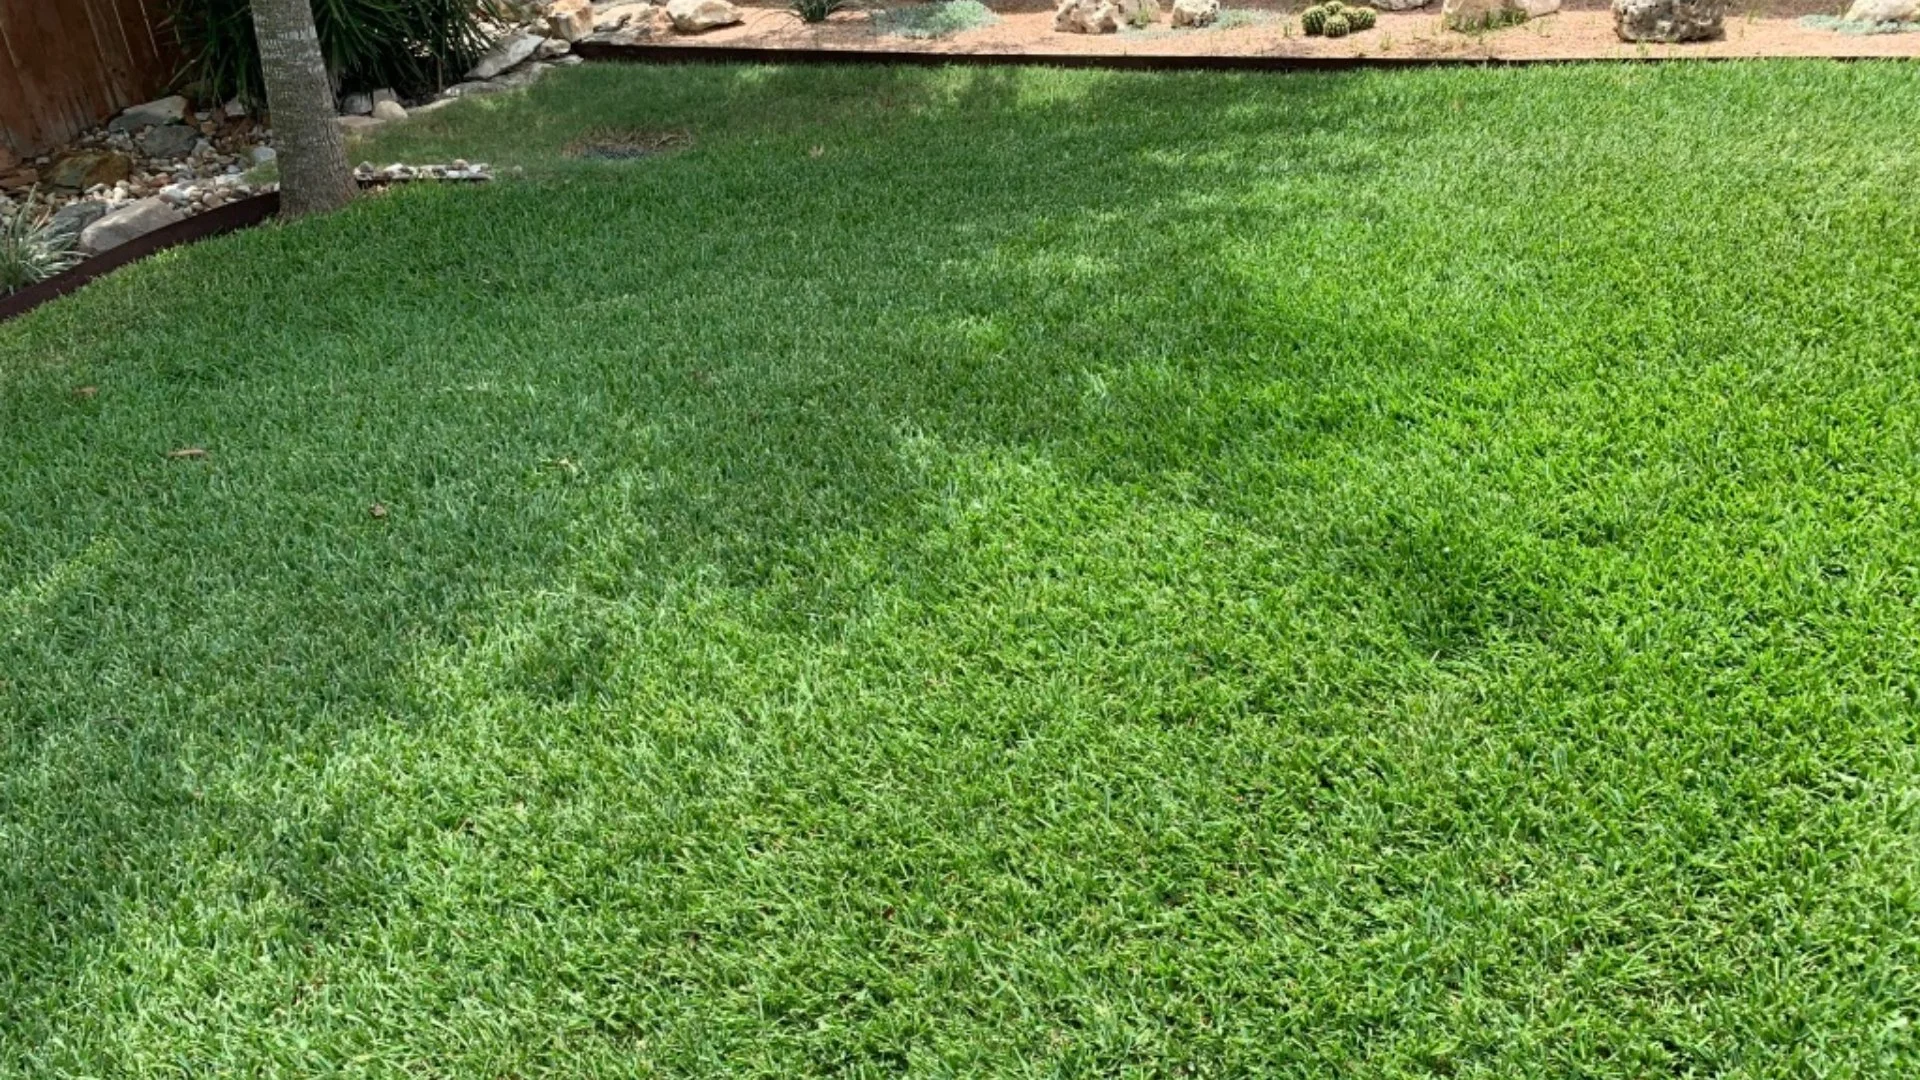 A Breakdown of All the Lawn Care Your Grass Needs in the Spring